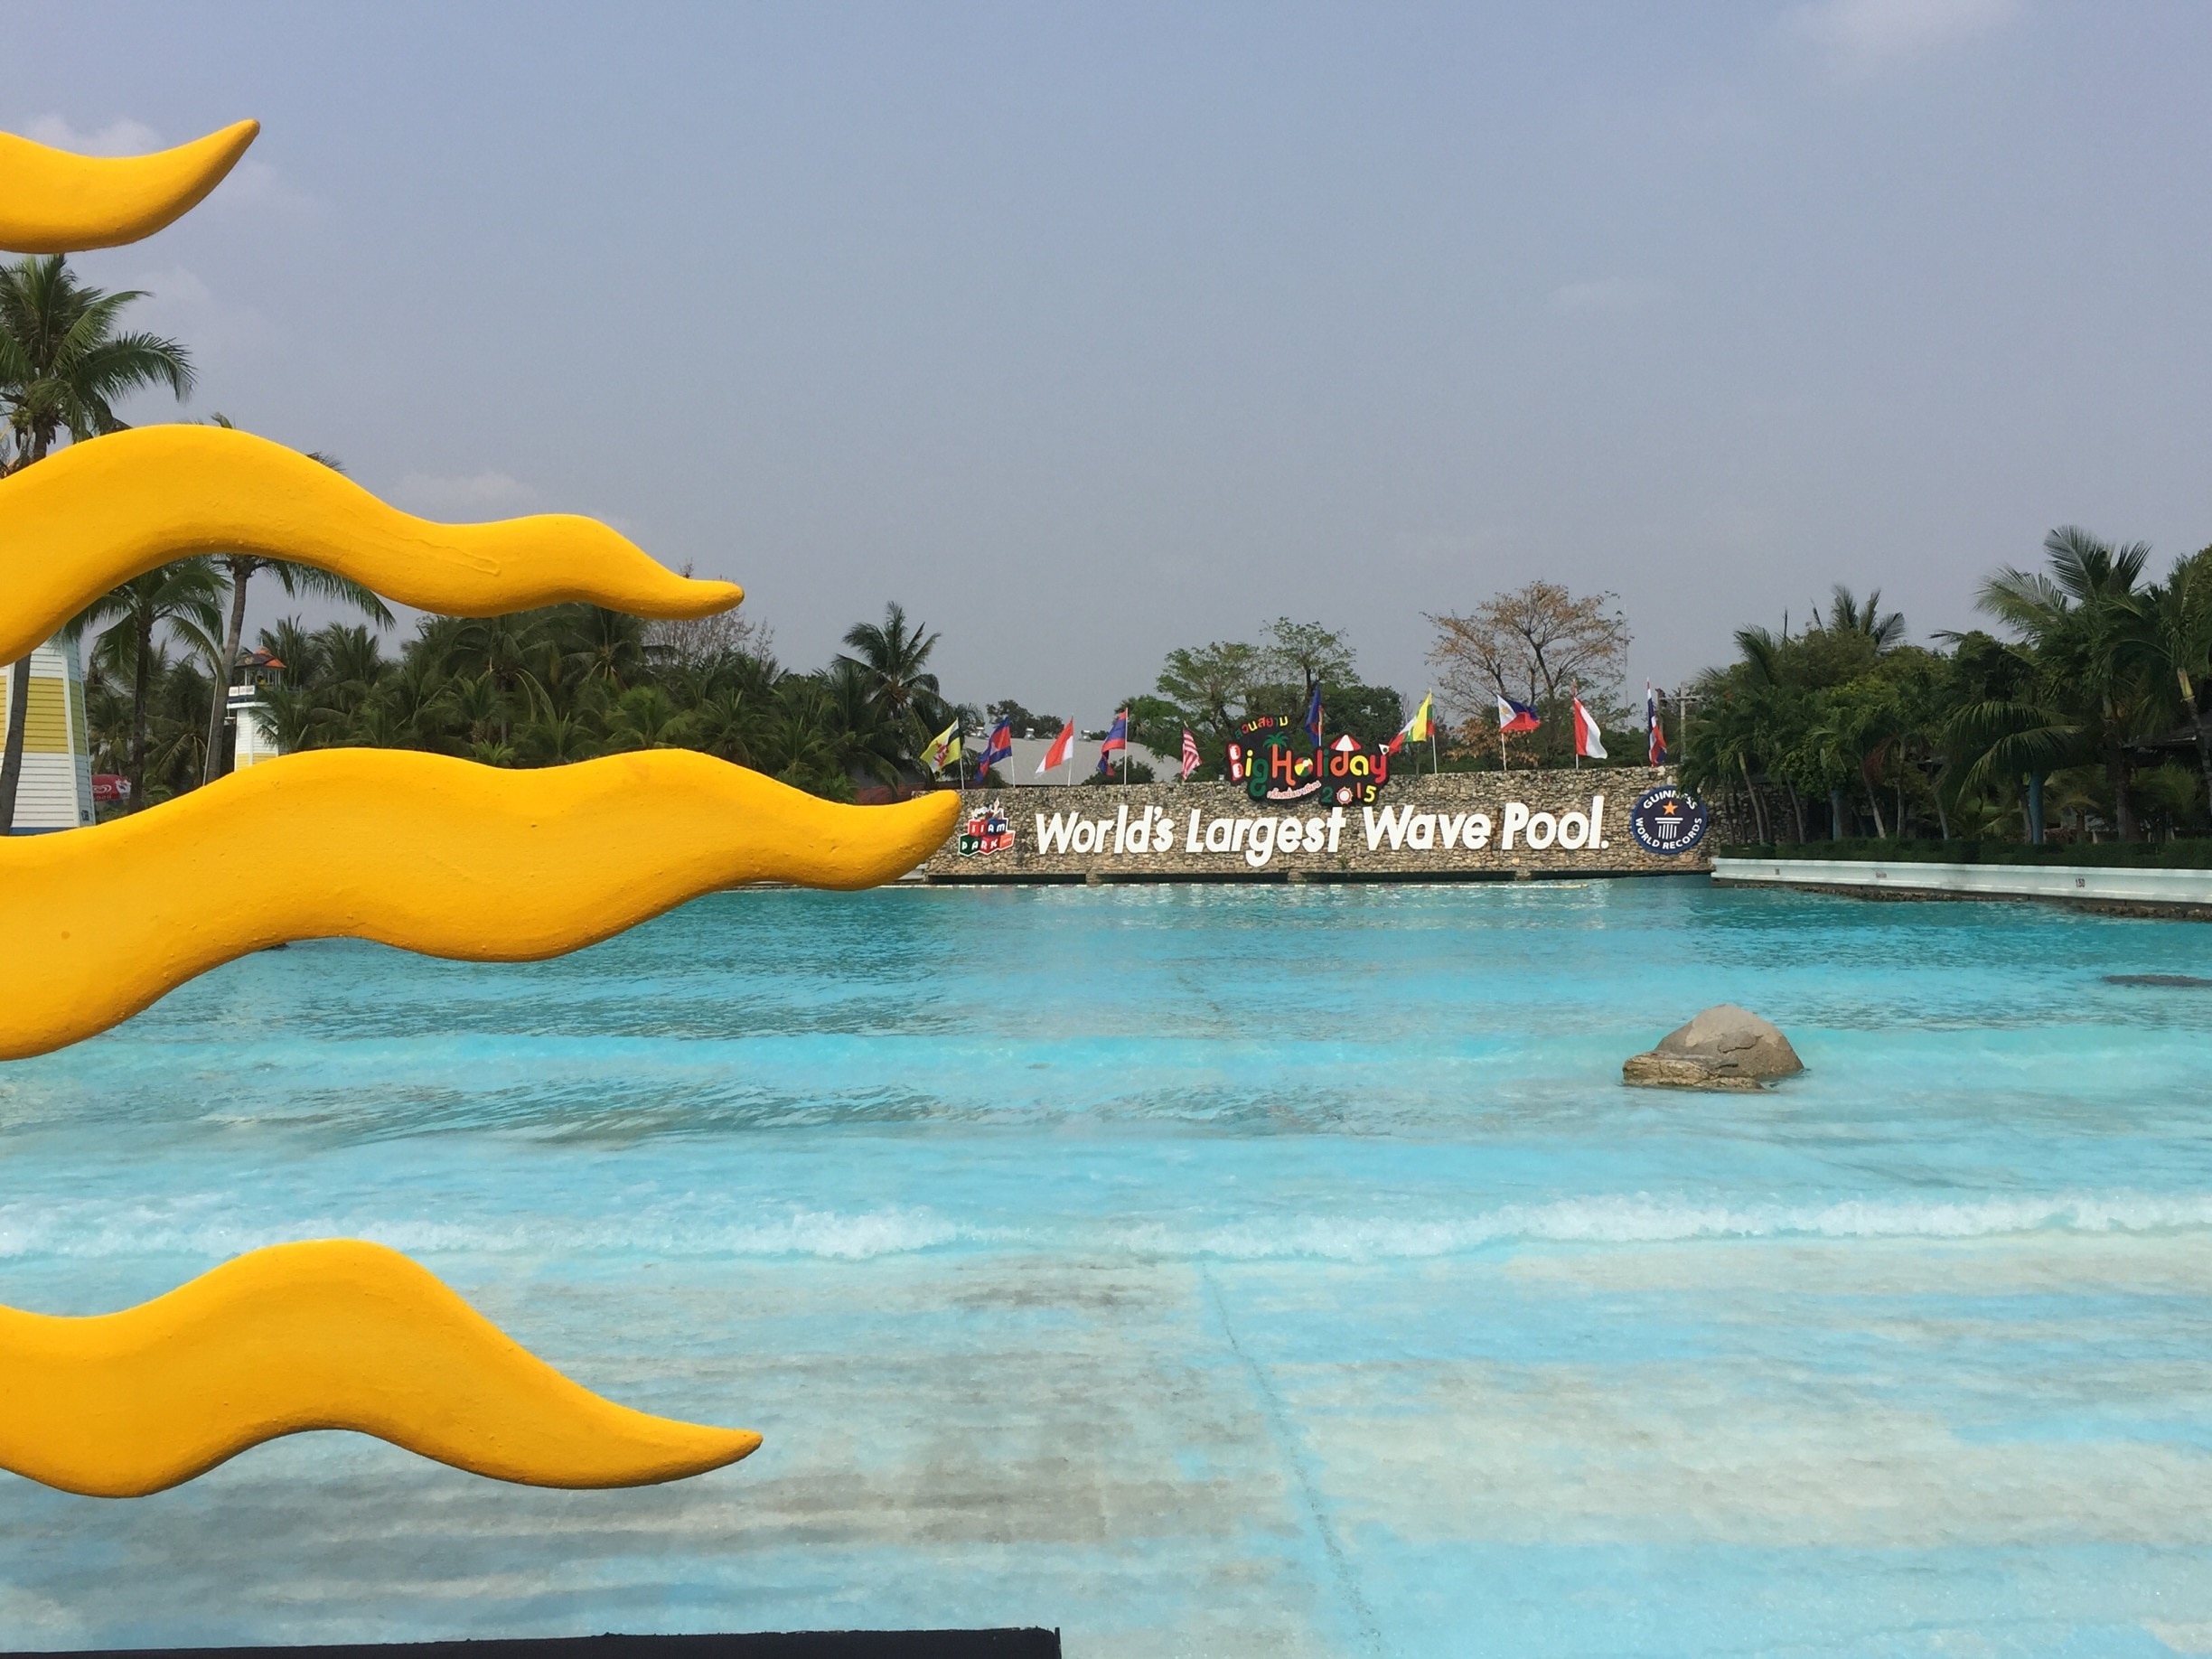 Bangkok has plenty of family tourist attractions. One of the most popular has been Siam Park City which has the world's largest wave pool. It has fun rides, shows and picnic areas. Come on a weekday when there are not too many people.